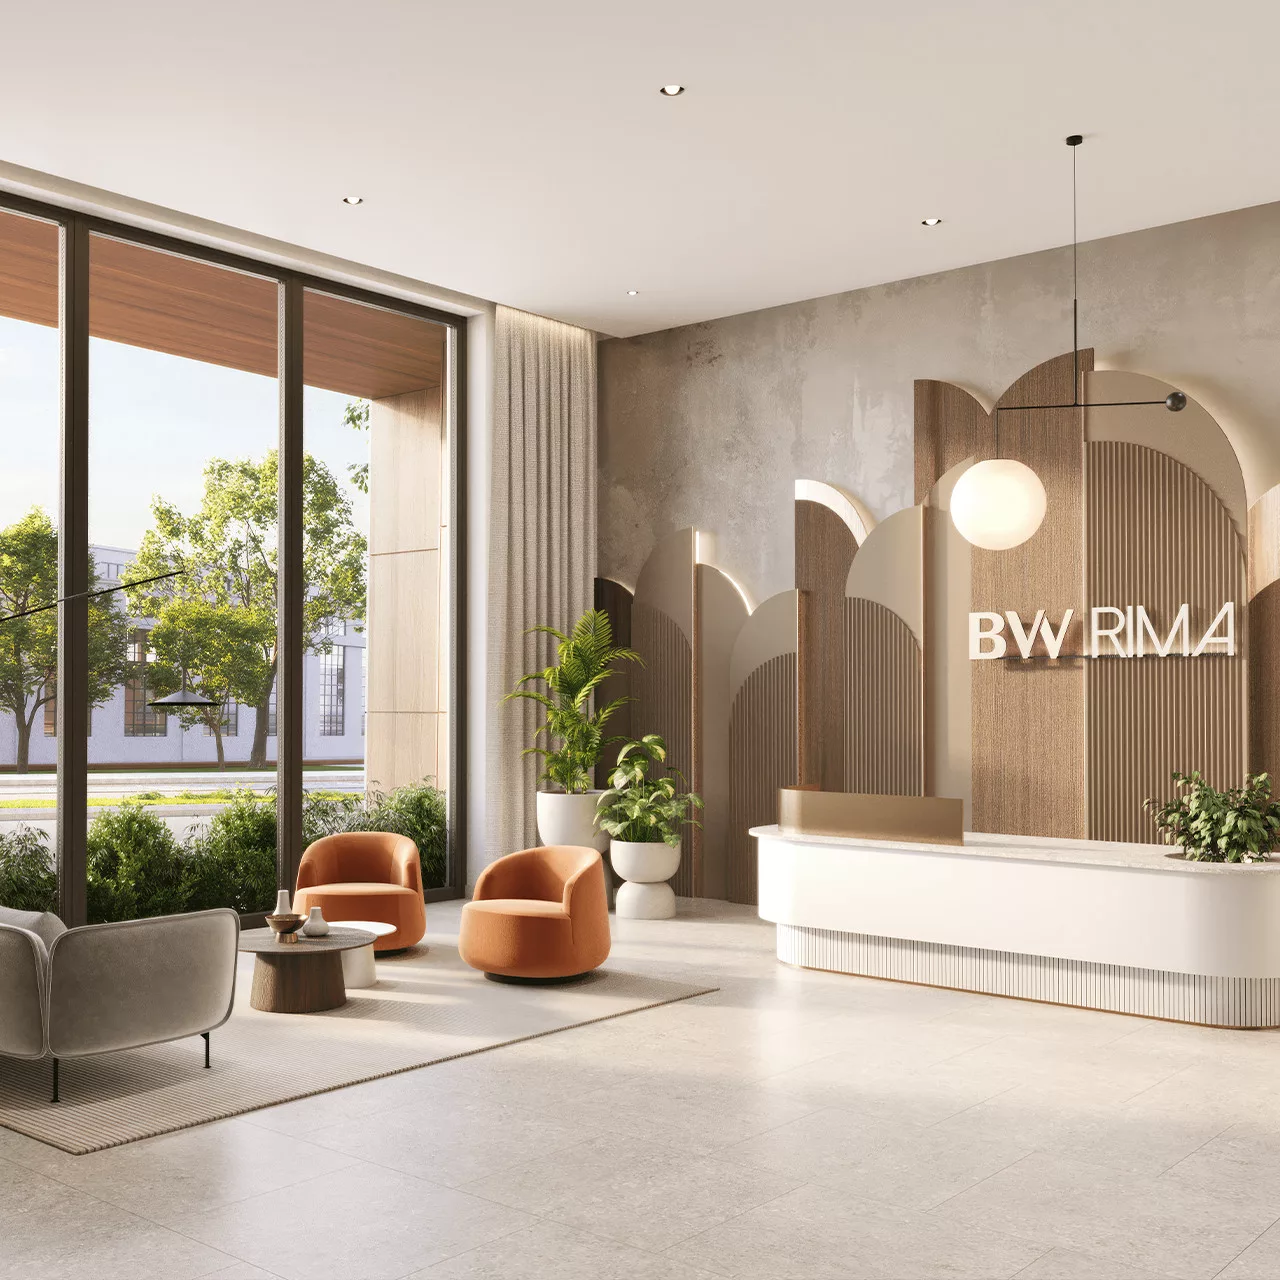 Spacious lobby with reception in the BW Rima building